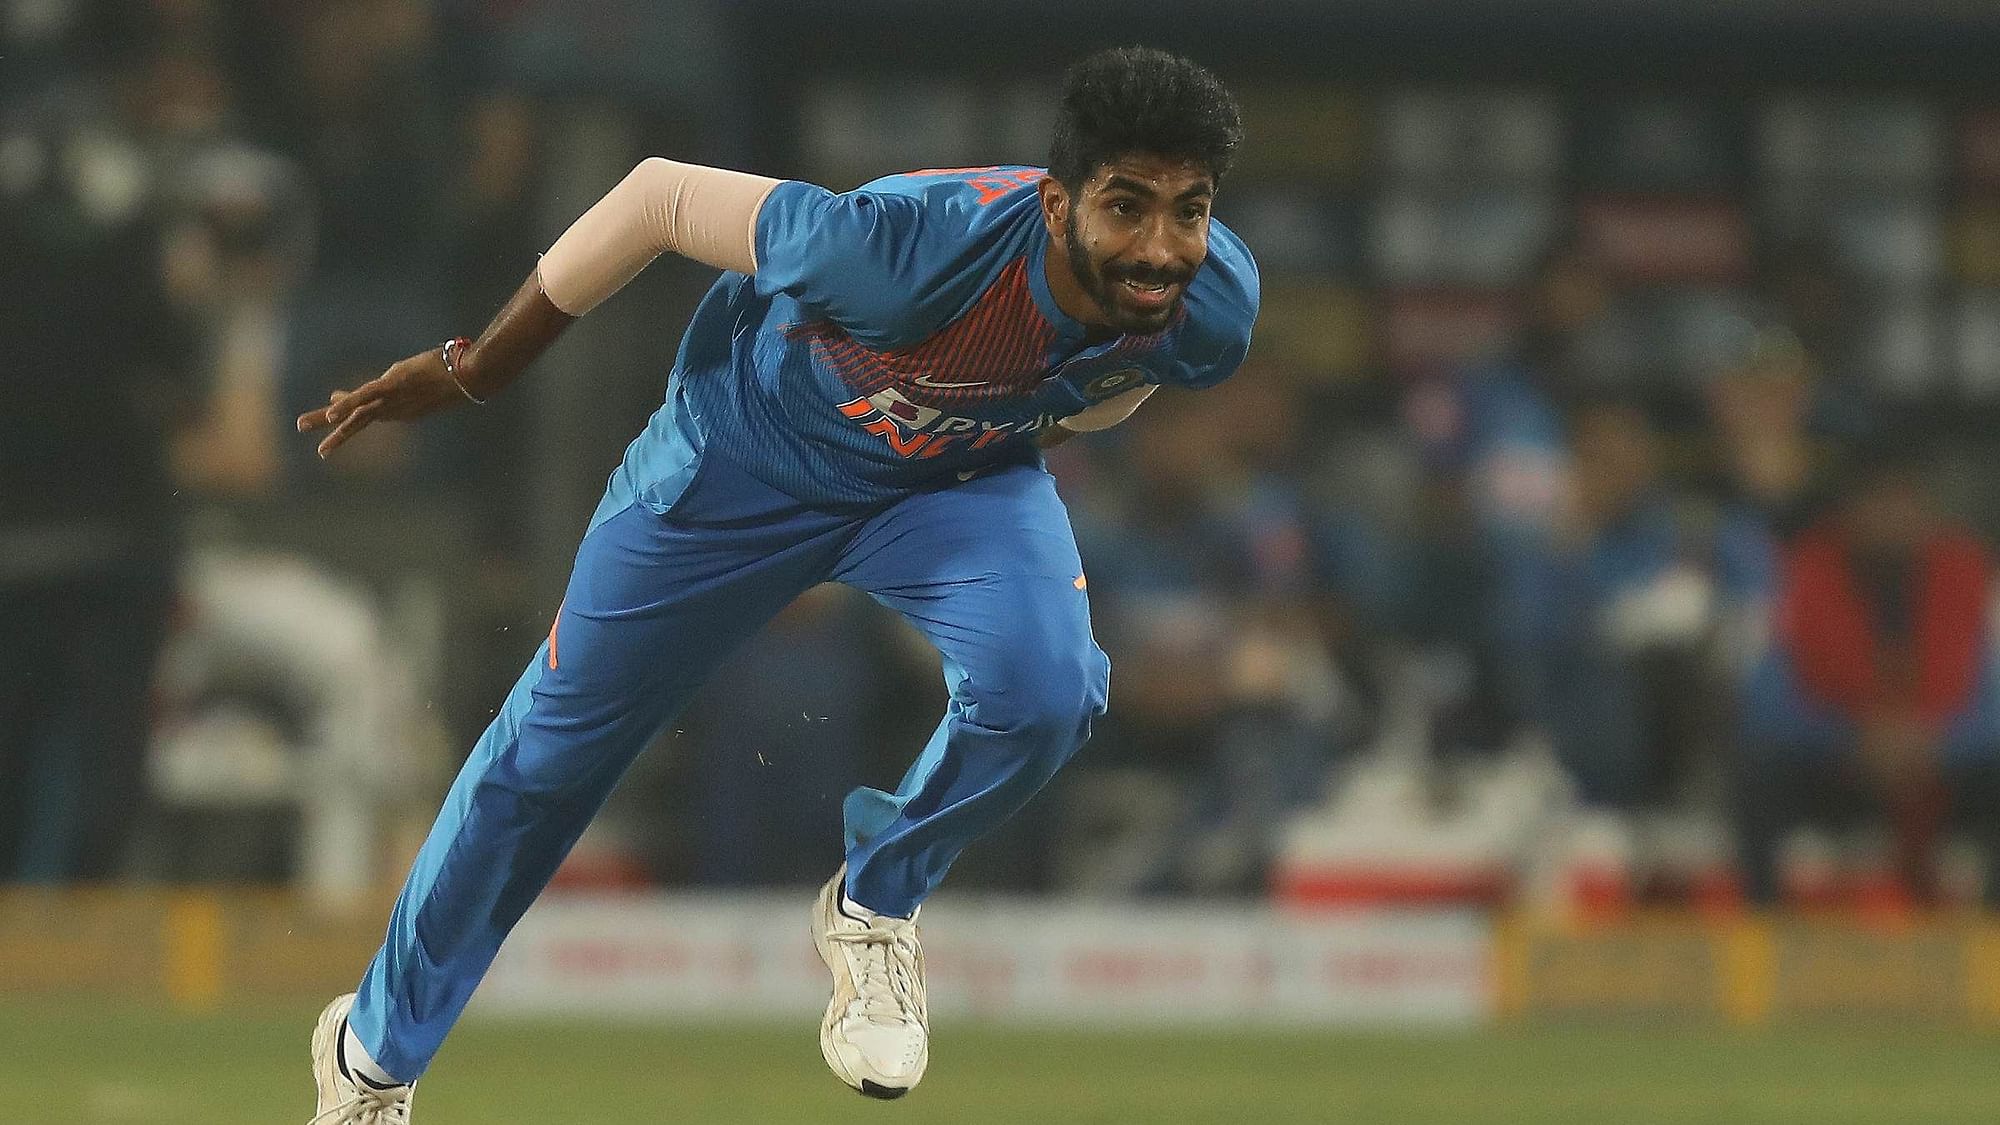 Jasprit Bumrah leaked 167 runs in the three ODI matches against New Zealand while failing to pick a single wicket.